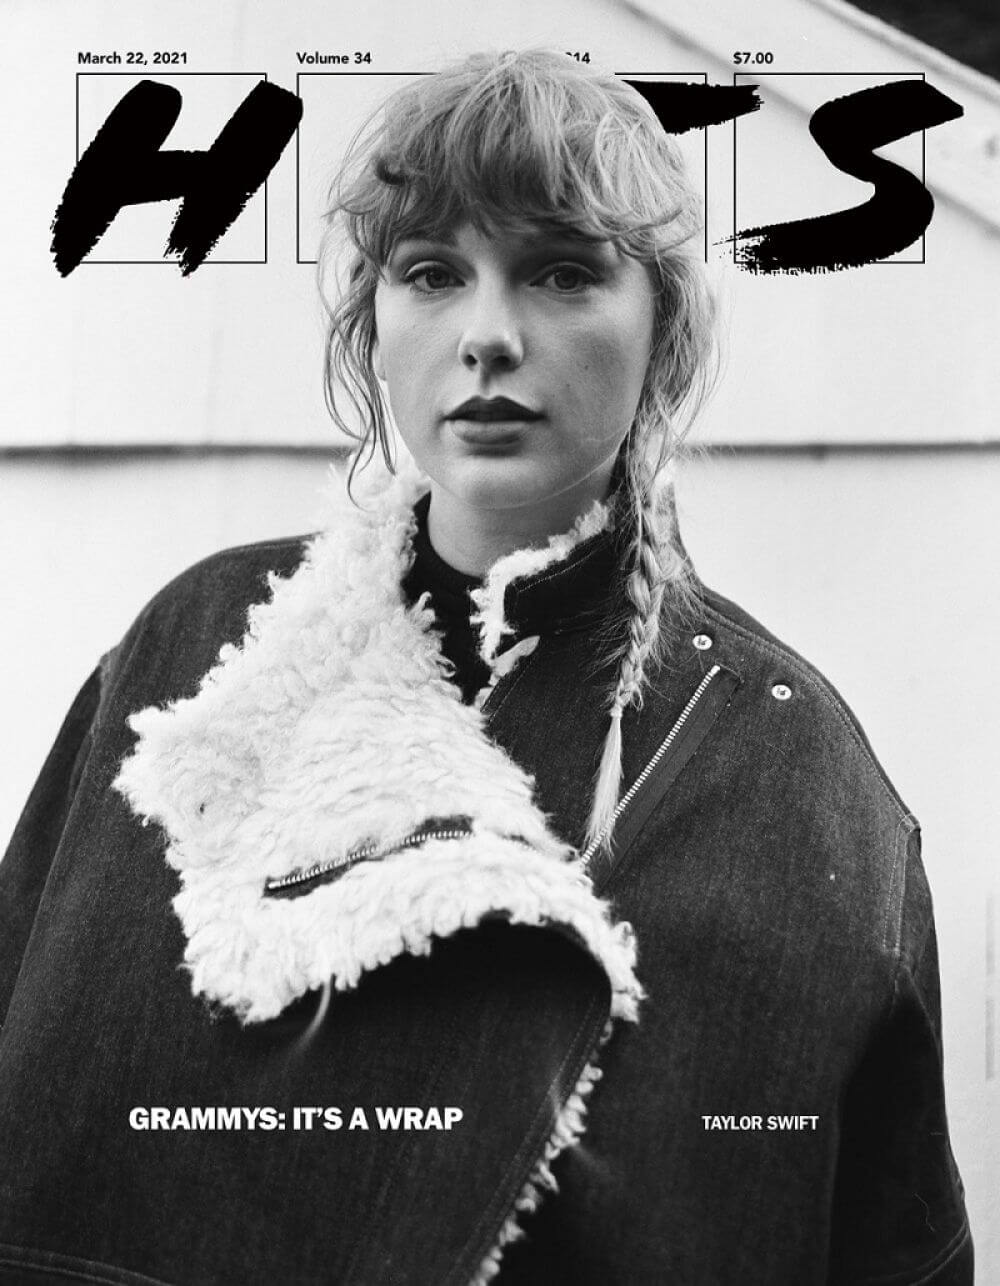 Taylor Swift Photoshoot For HITS Magazine, March 2021